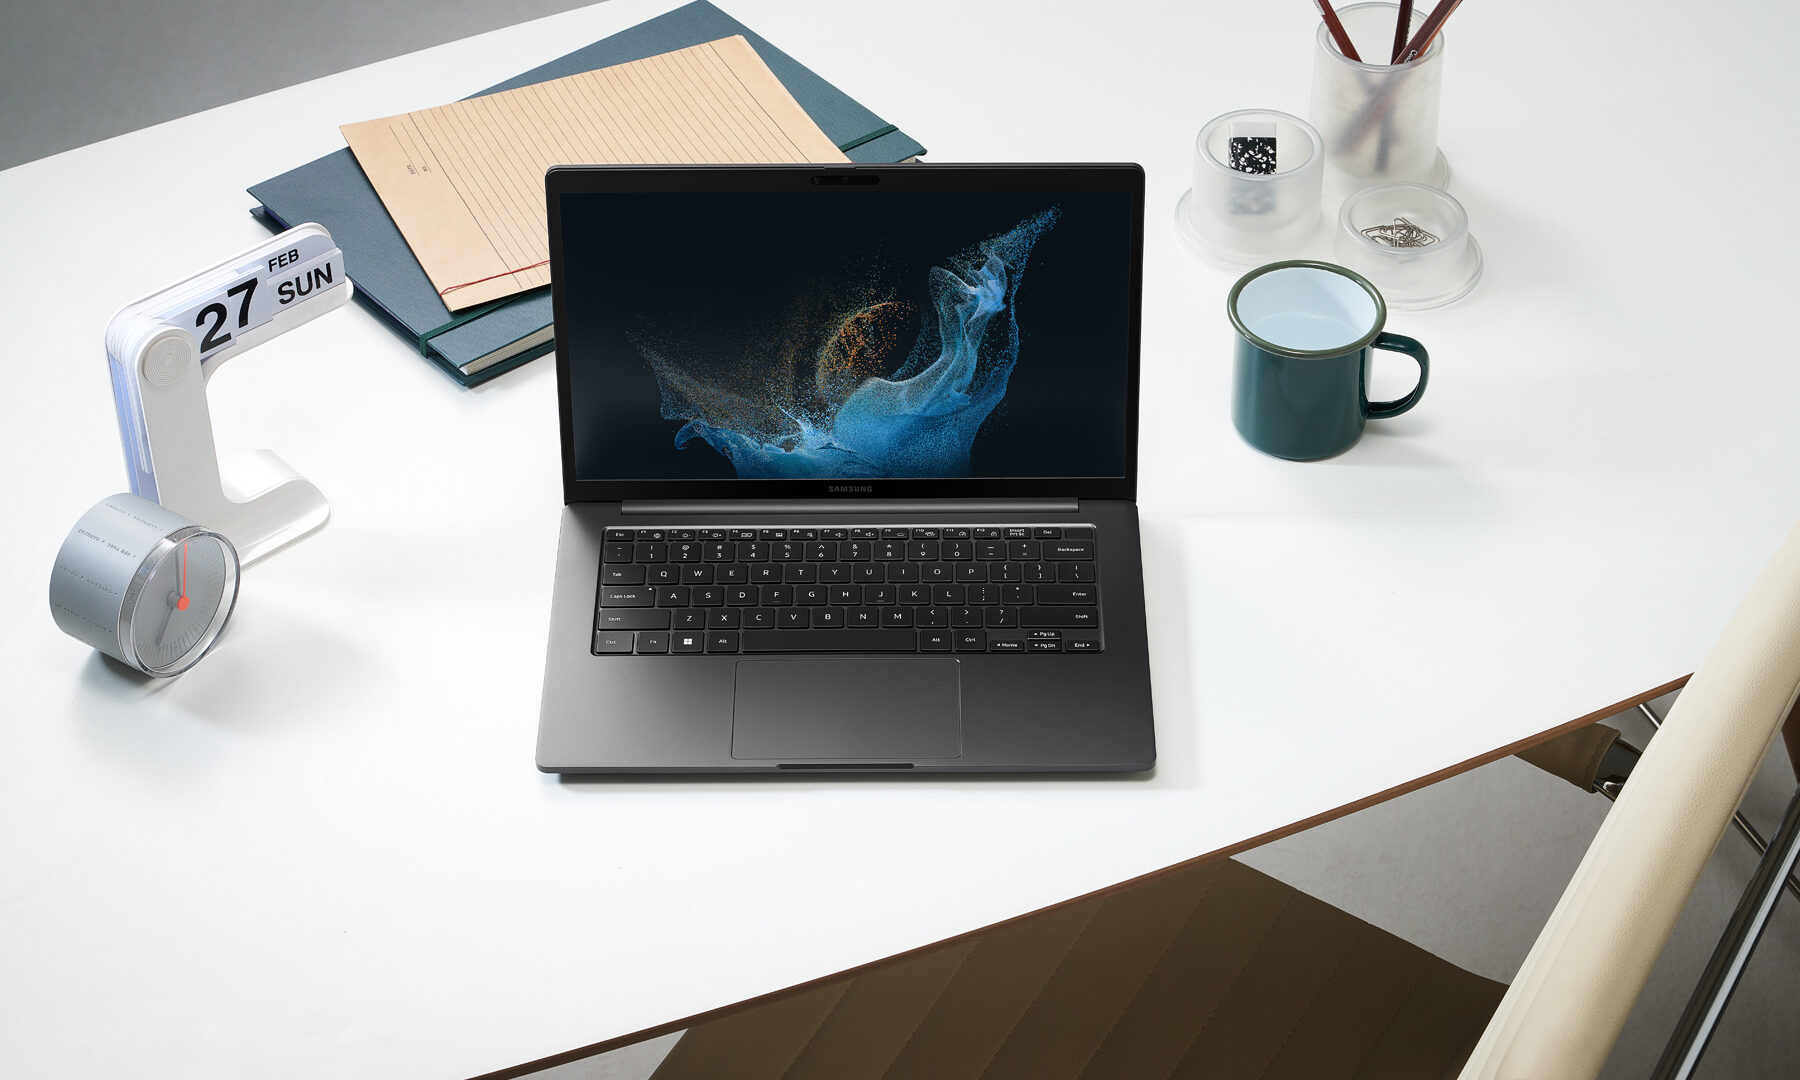 Samsung Galaxy Book 2, Galaxy Book Go laptops launched in India - SamMobile